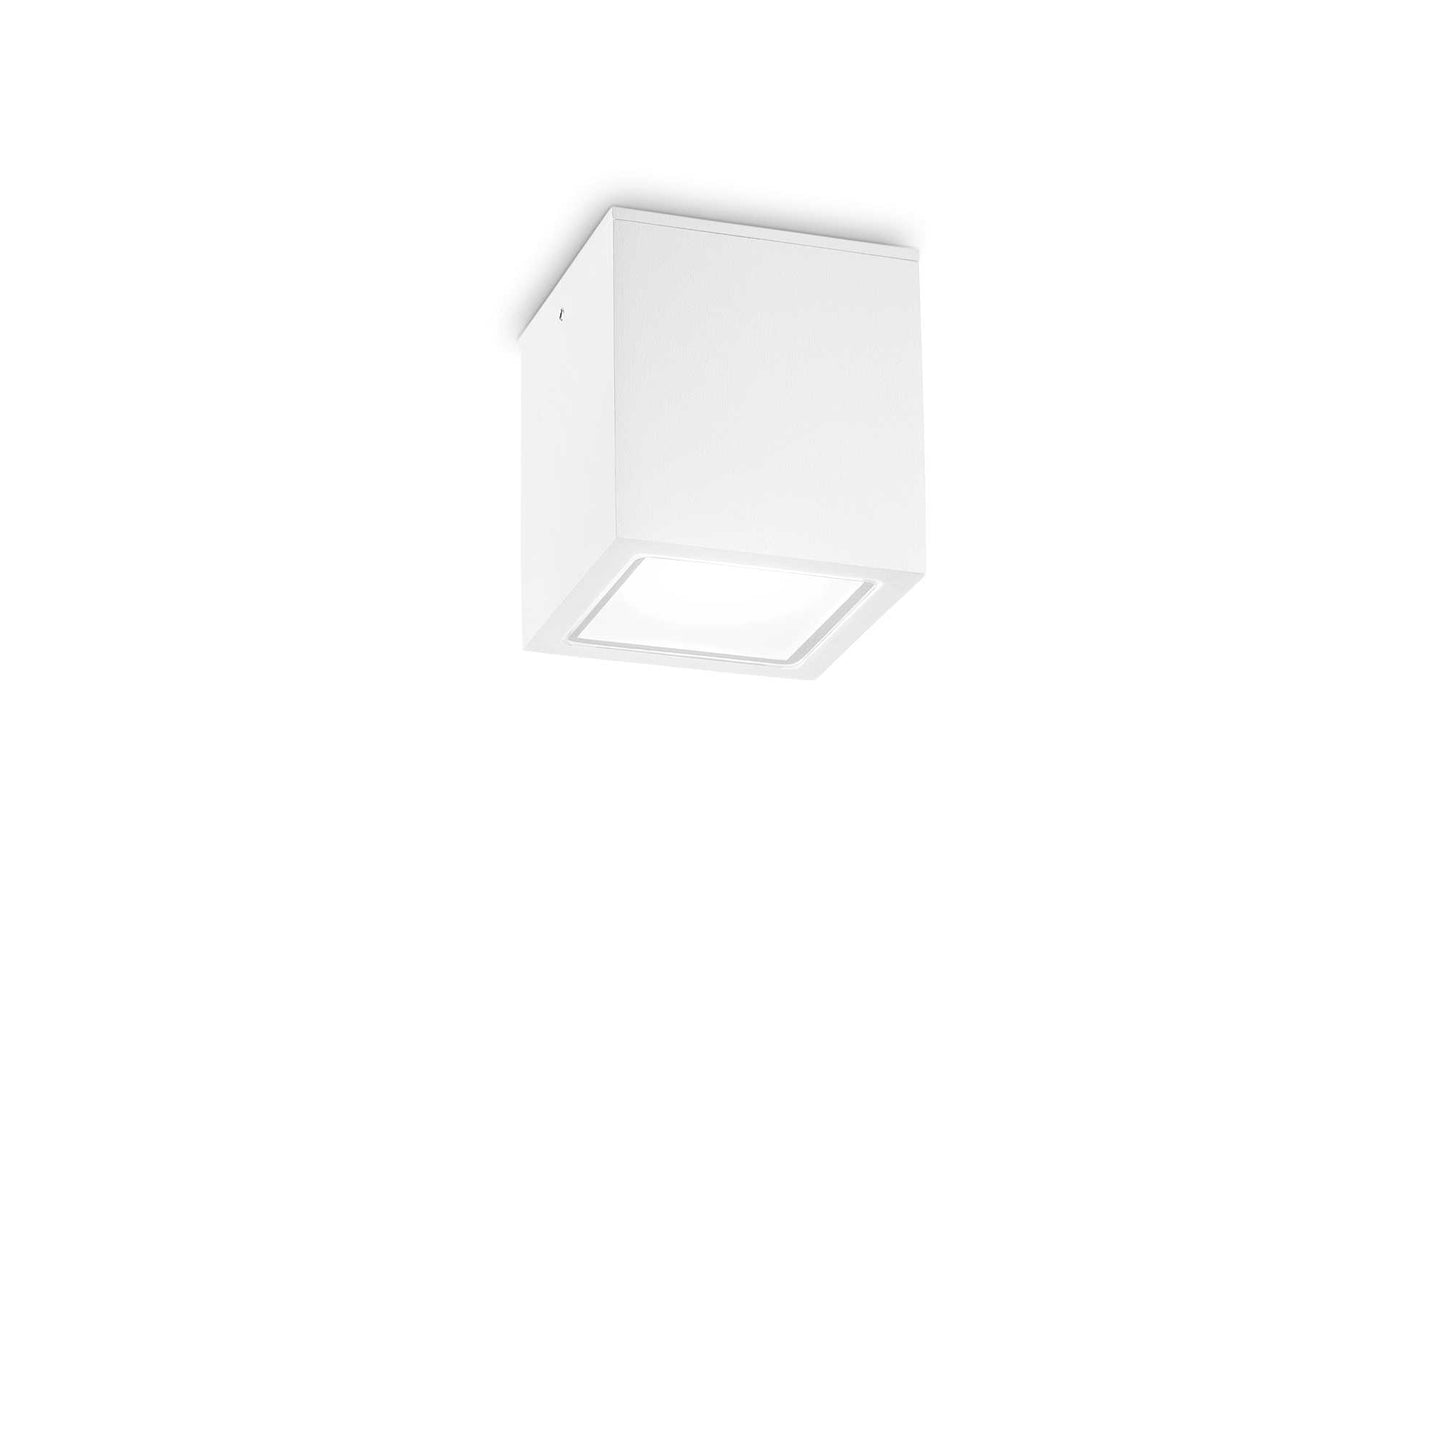 White outdoor ceiling light Ideal Lux 251561 TECHO SMALL GU10 LED IP54 modern ceiling lamp